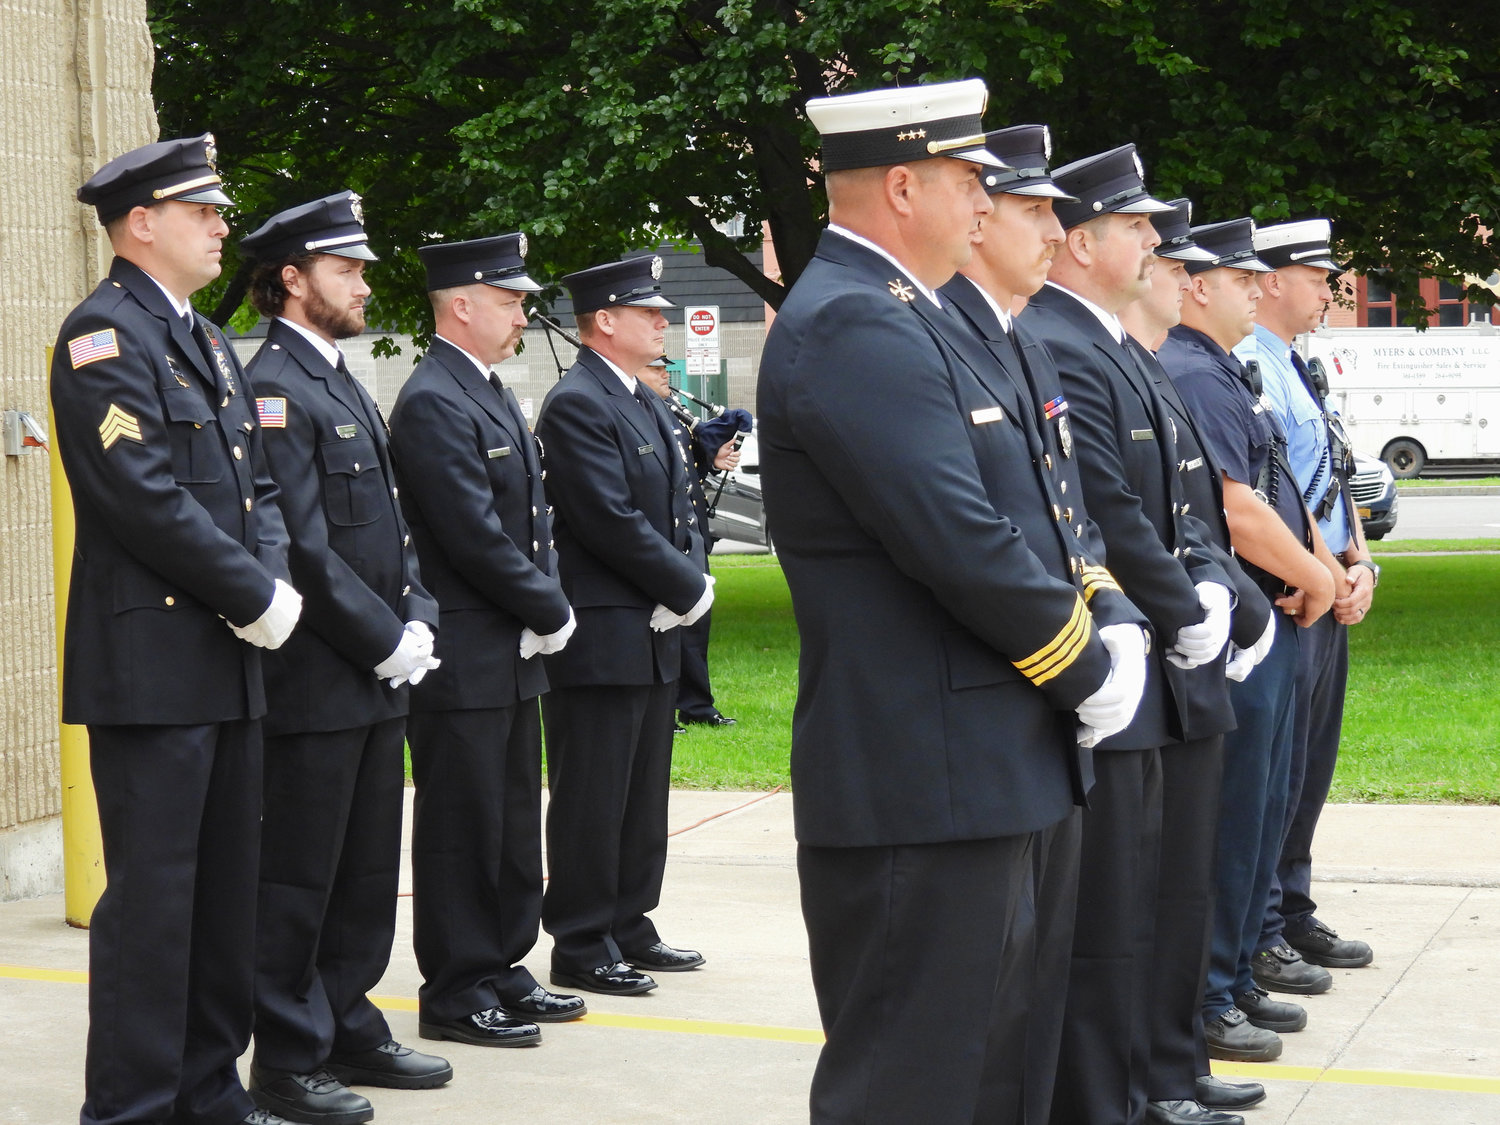 Members of the Oneida Fire Department and Police Department stand at attention, honoring and remembering those that lost their lives during 9/11.